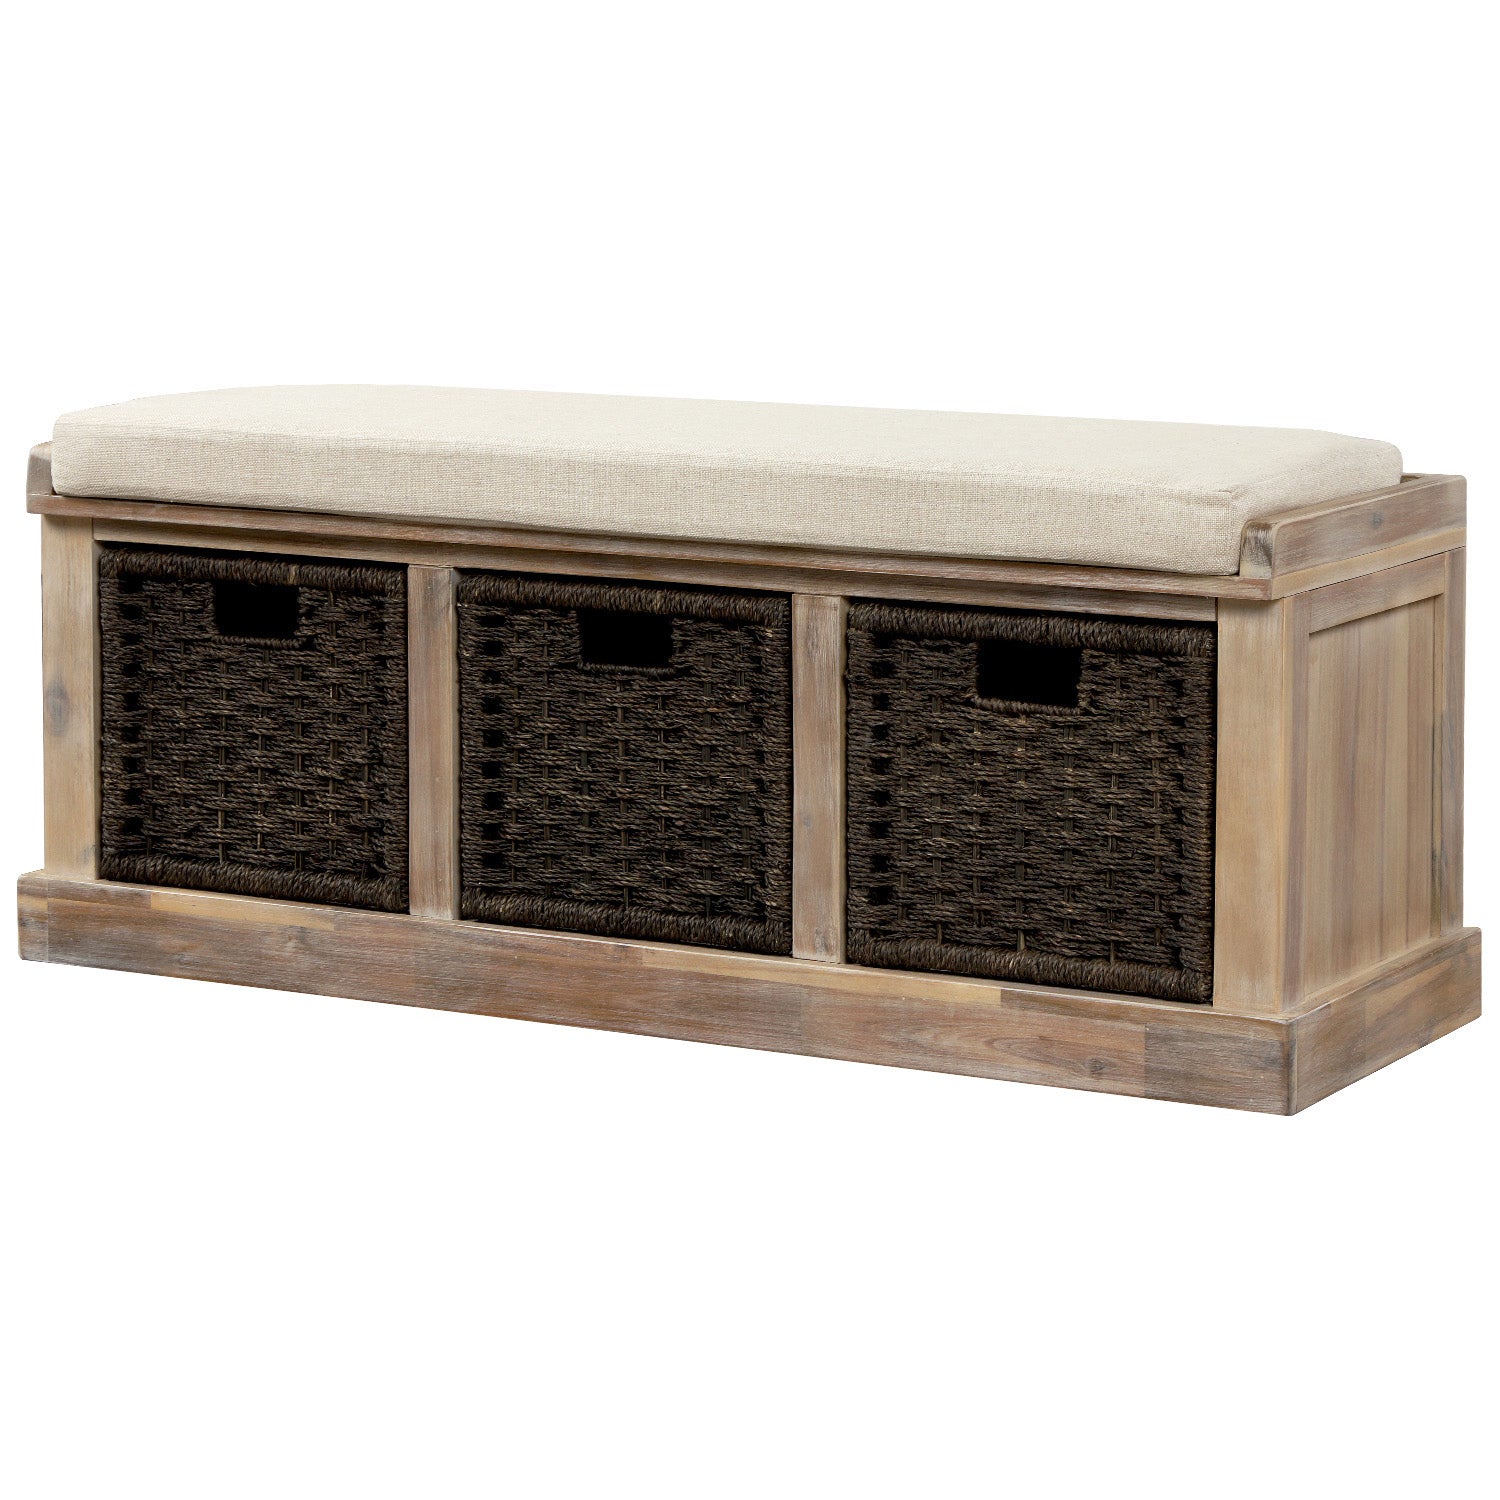 Rustic Storage Bench with 3 Removable Classic white washed-solid wood